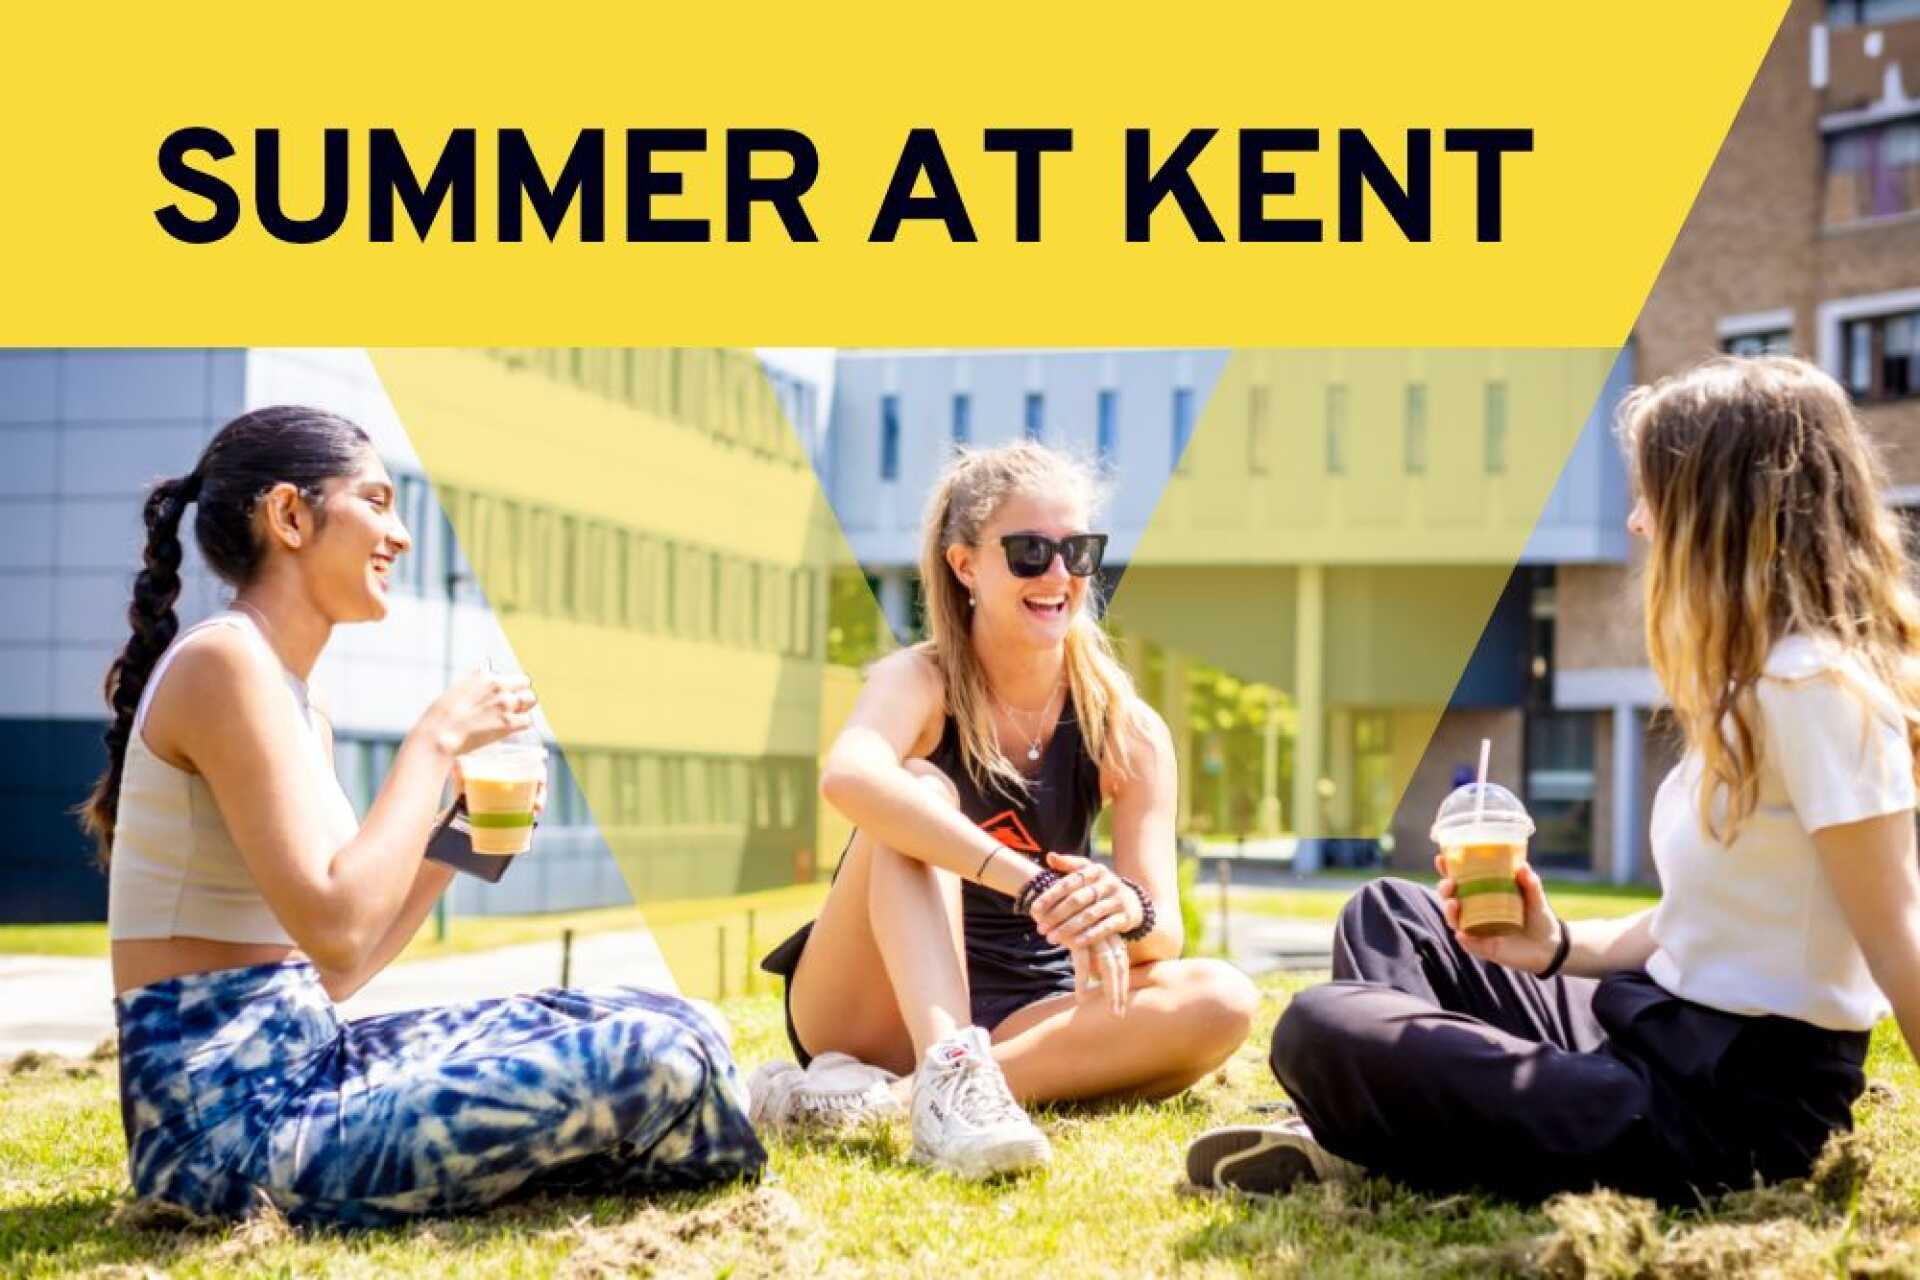 Summer at Kent - students sitting outside with iced coffees